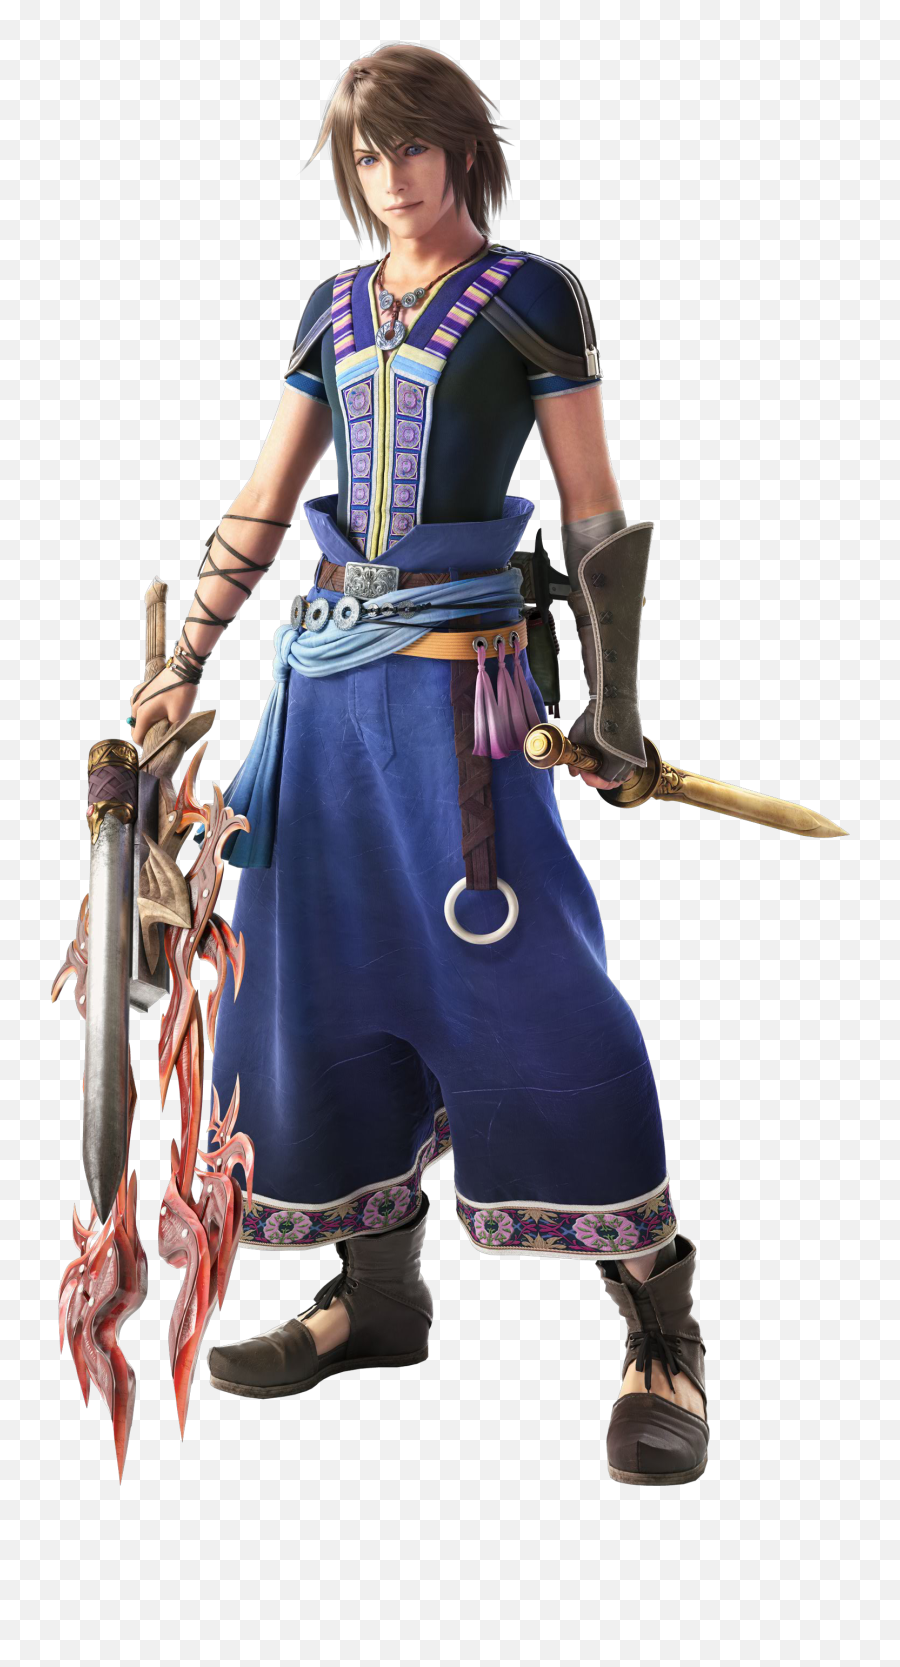 Final Fantasy Xiii - 2 Character Renders And High Resolution Final Fantasy Noel Emoji,Final Fantasy 8 Logo